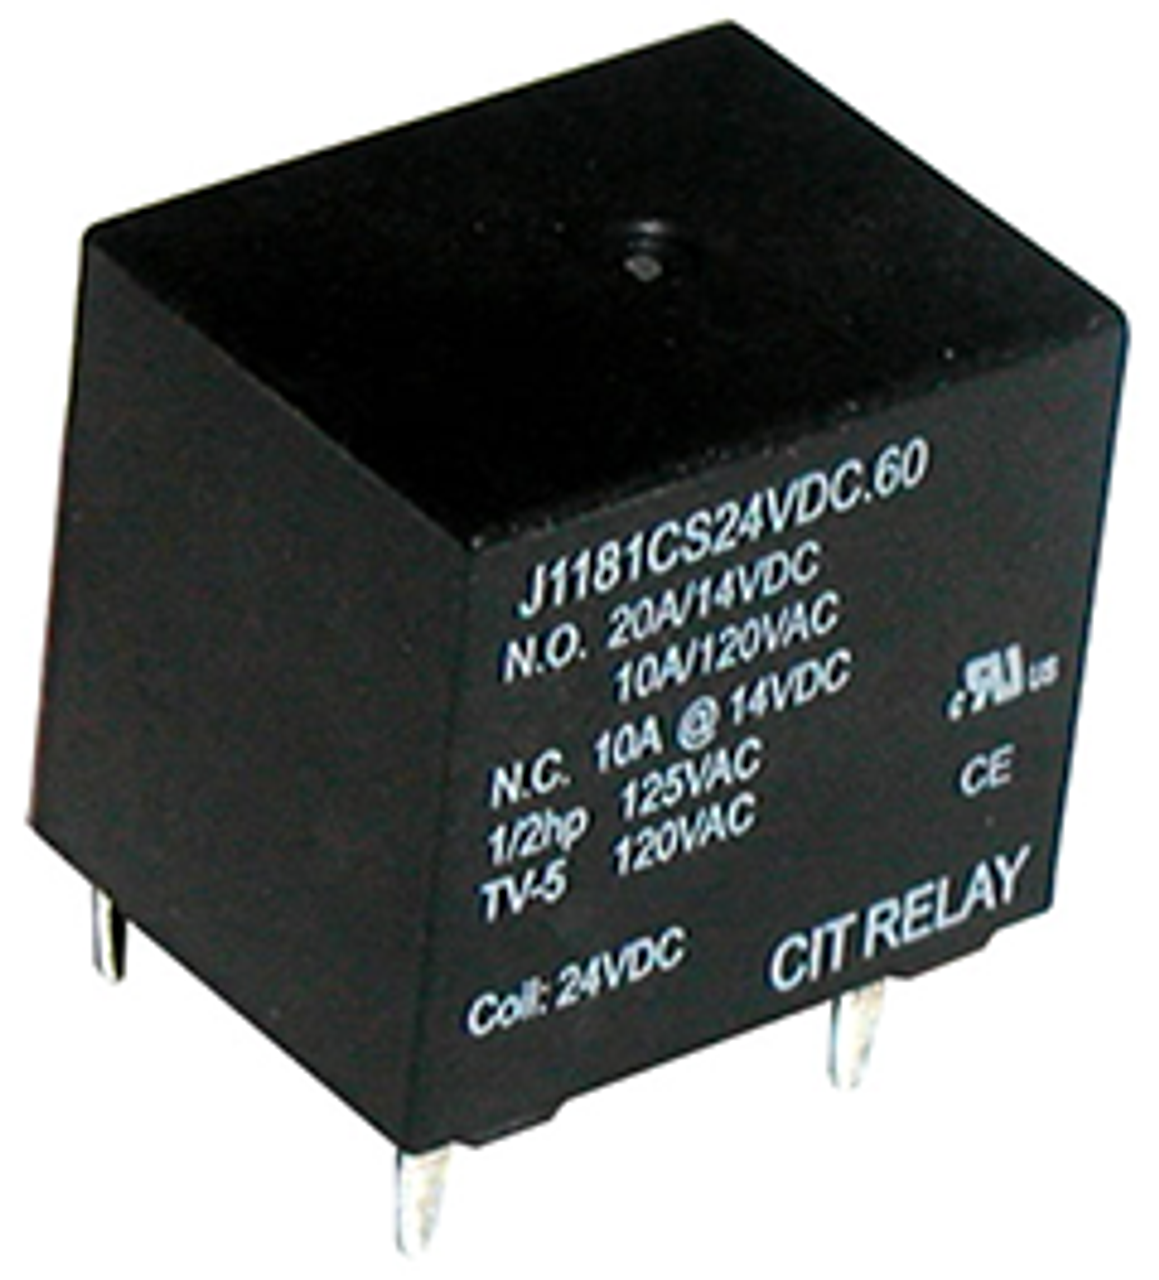 CIT Relay and Switch J1181BS24VDC.80 Power Relays